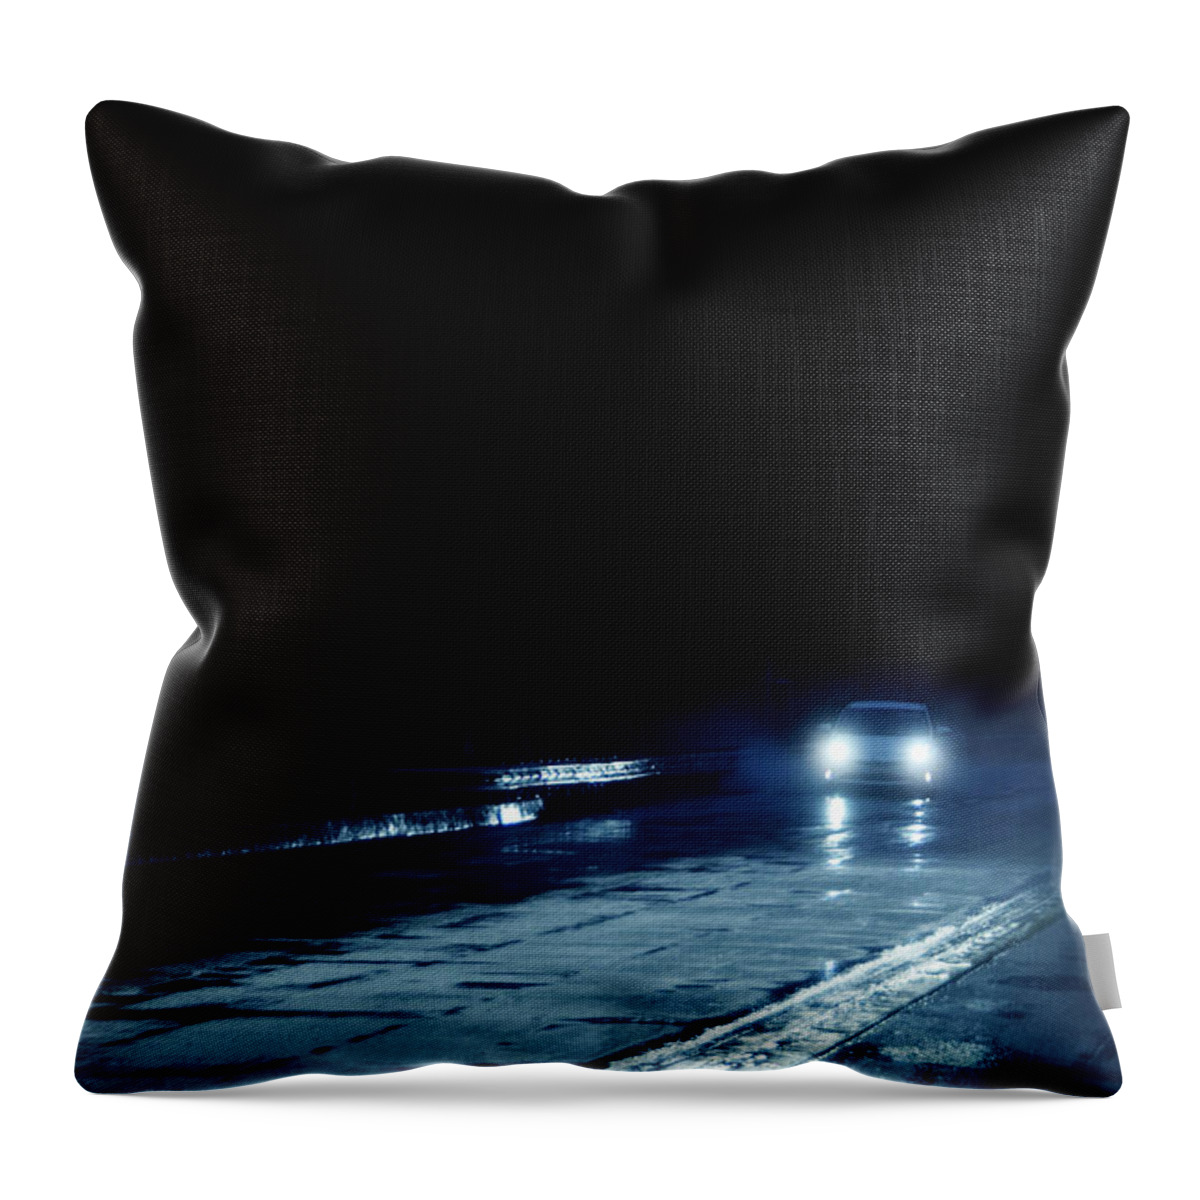 Car Throw Pillow featuring the photograph Car On a Rainy Highway at Night by Jill Battaglia